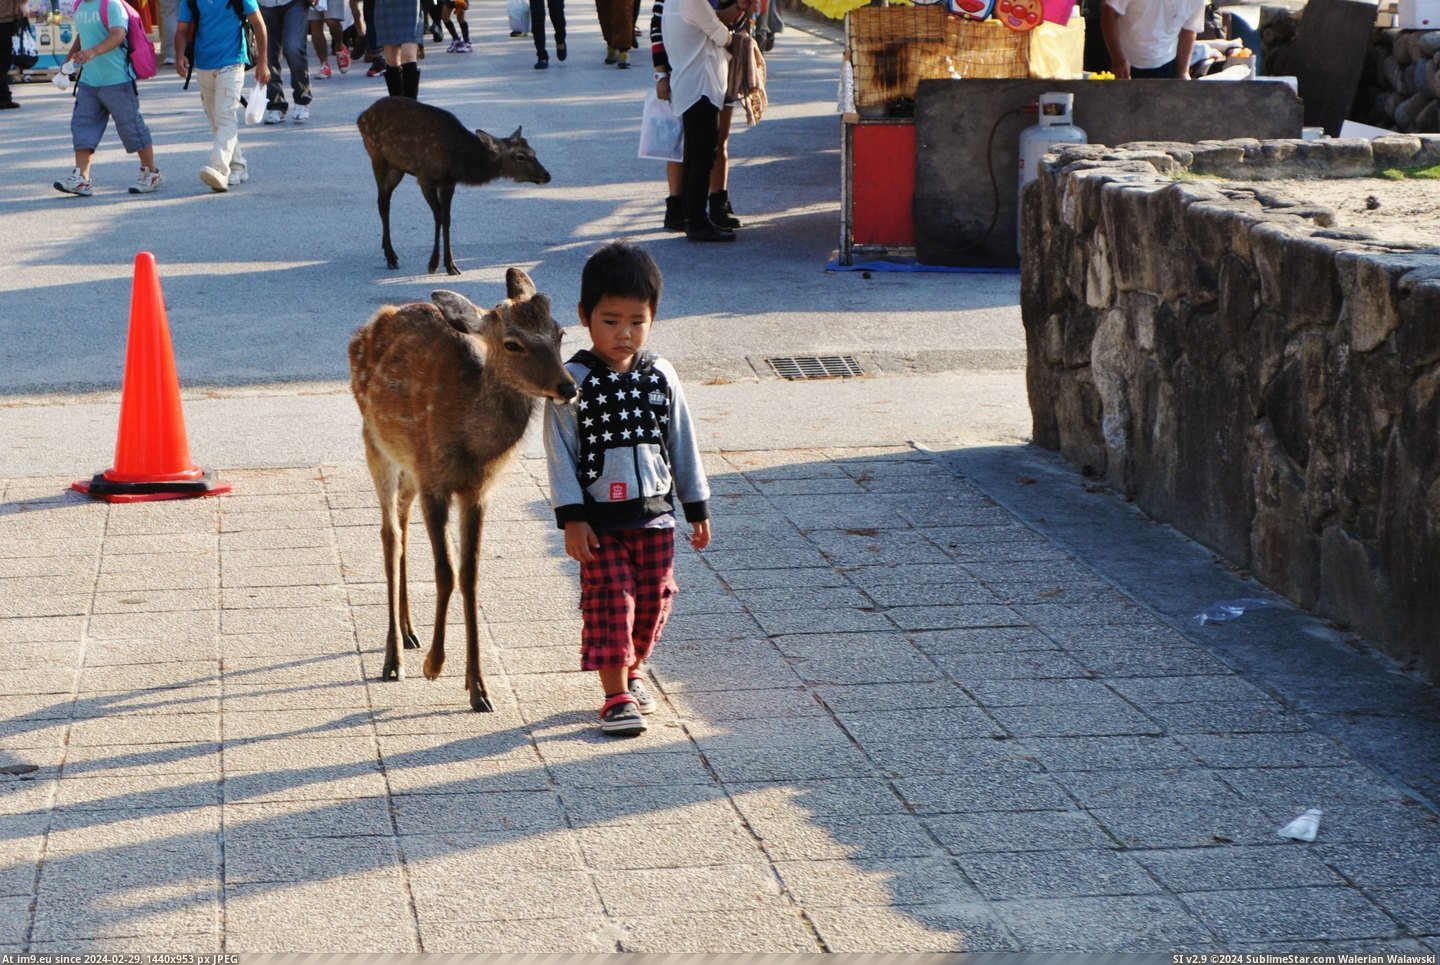 #One #Free #Island #Hundreds #Roam #Silently #Miyajima #Japan #Walking #Deer [Aww] There's an island in Japan, Miyajima, where deer roam free by the hundreds. This one was silently walking around with this Pic. (Image of album My r/AWW favs))